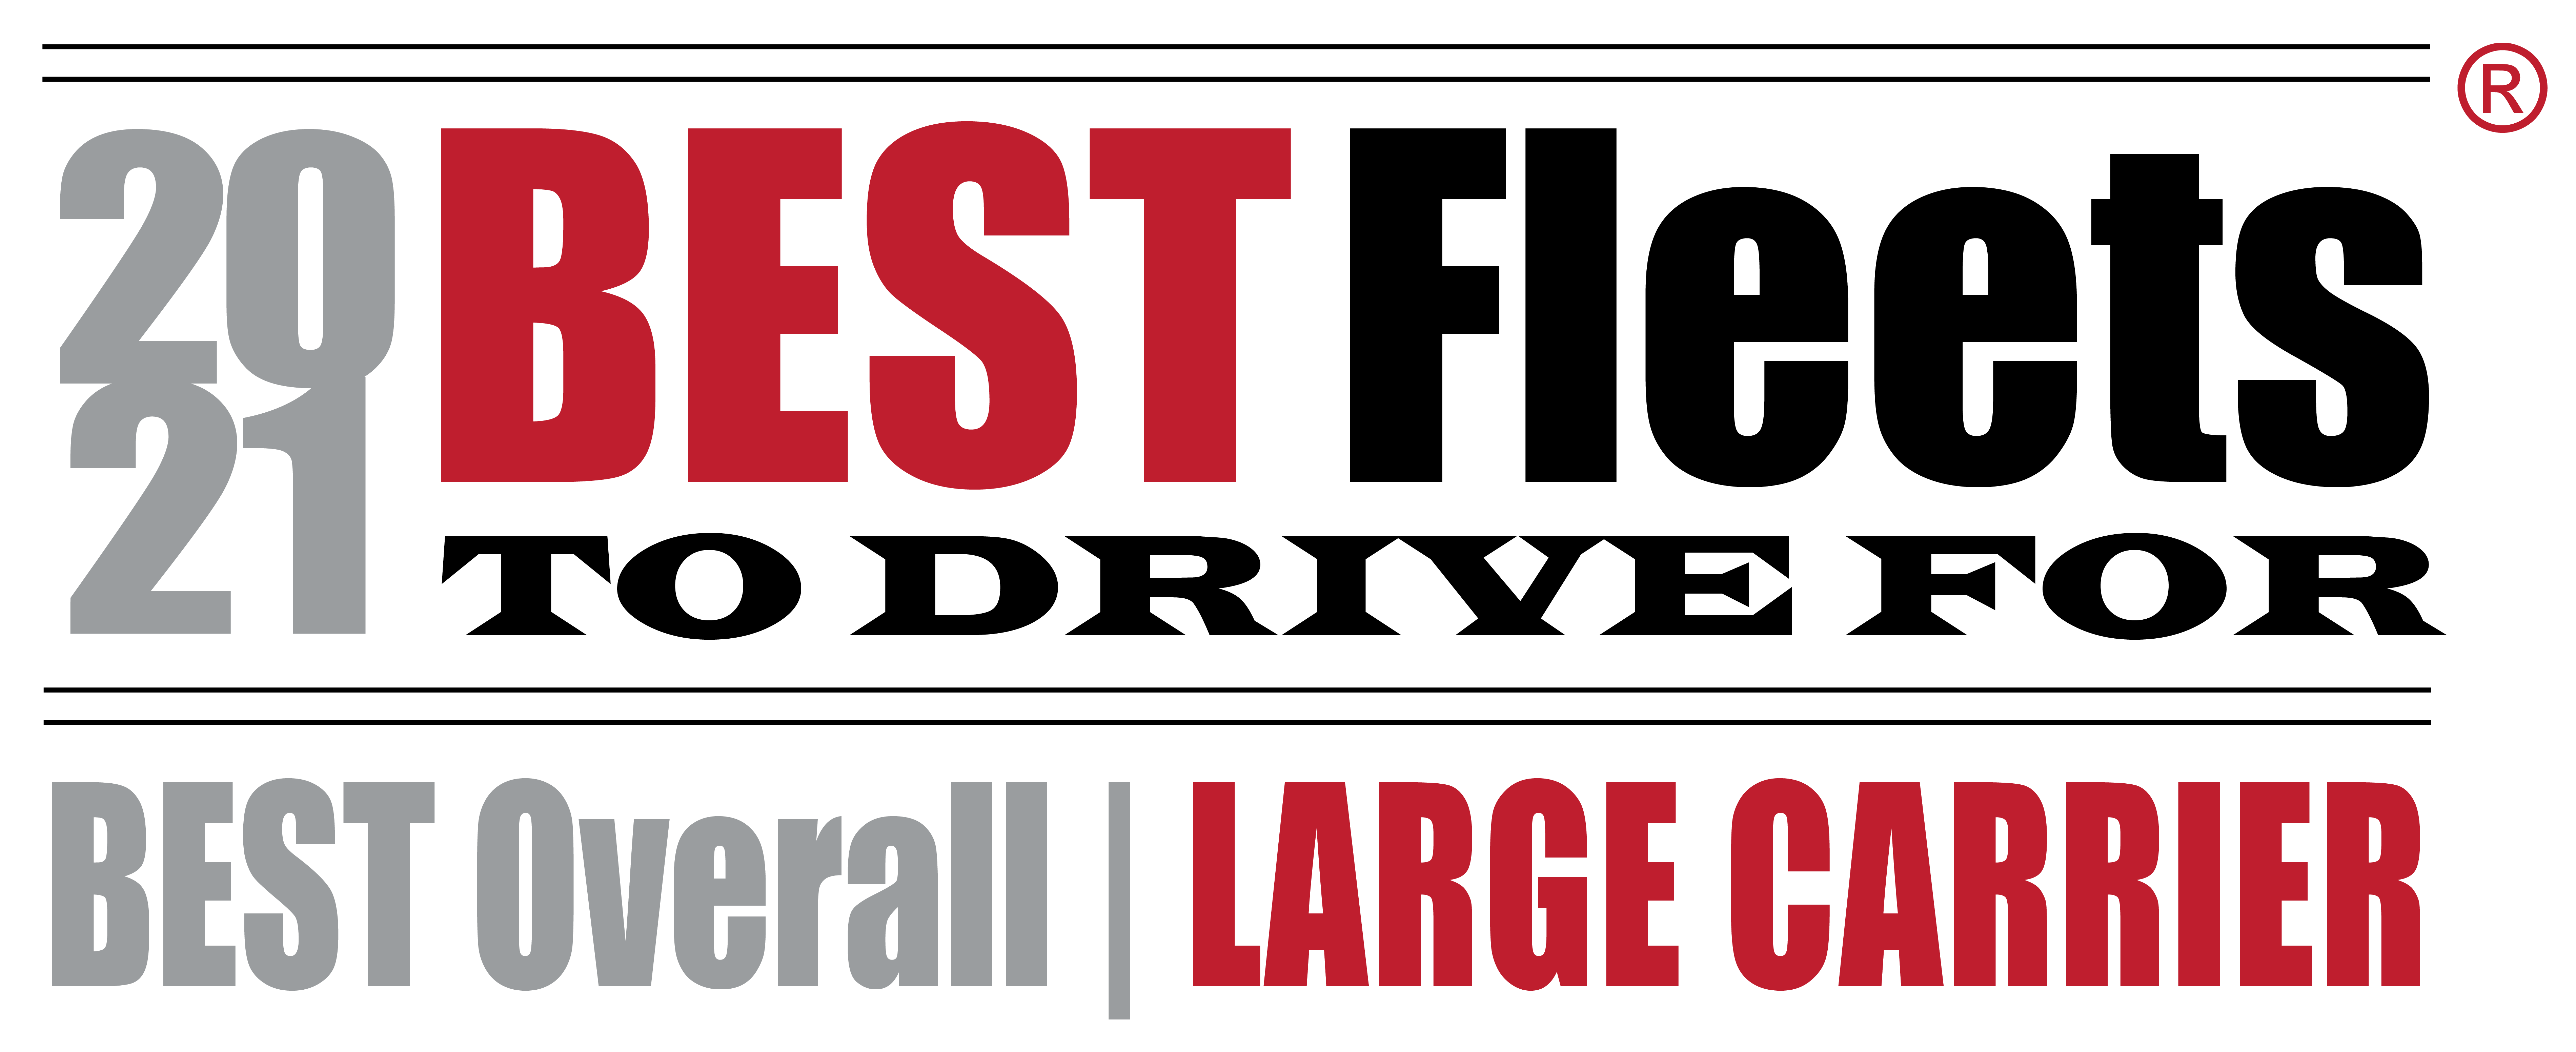 Best Fleets to drive for 2021